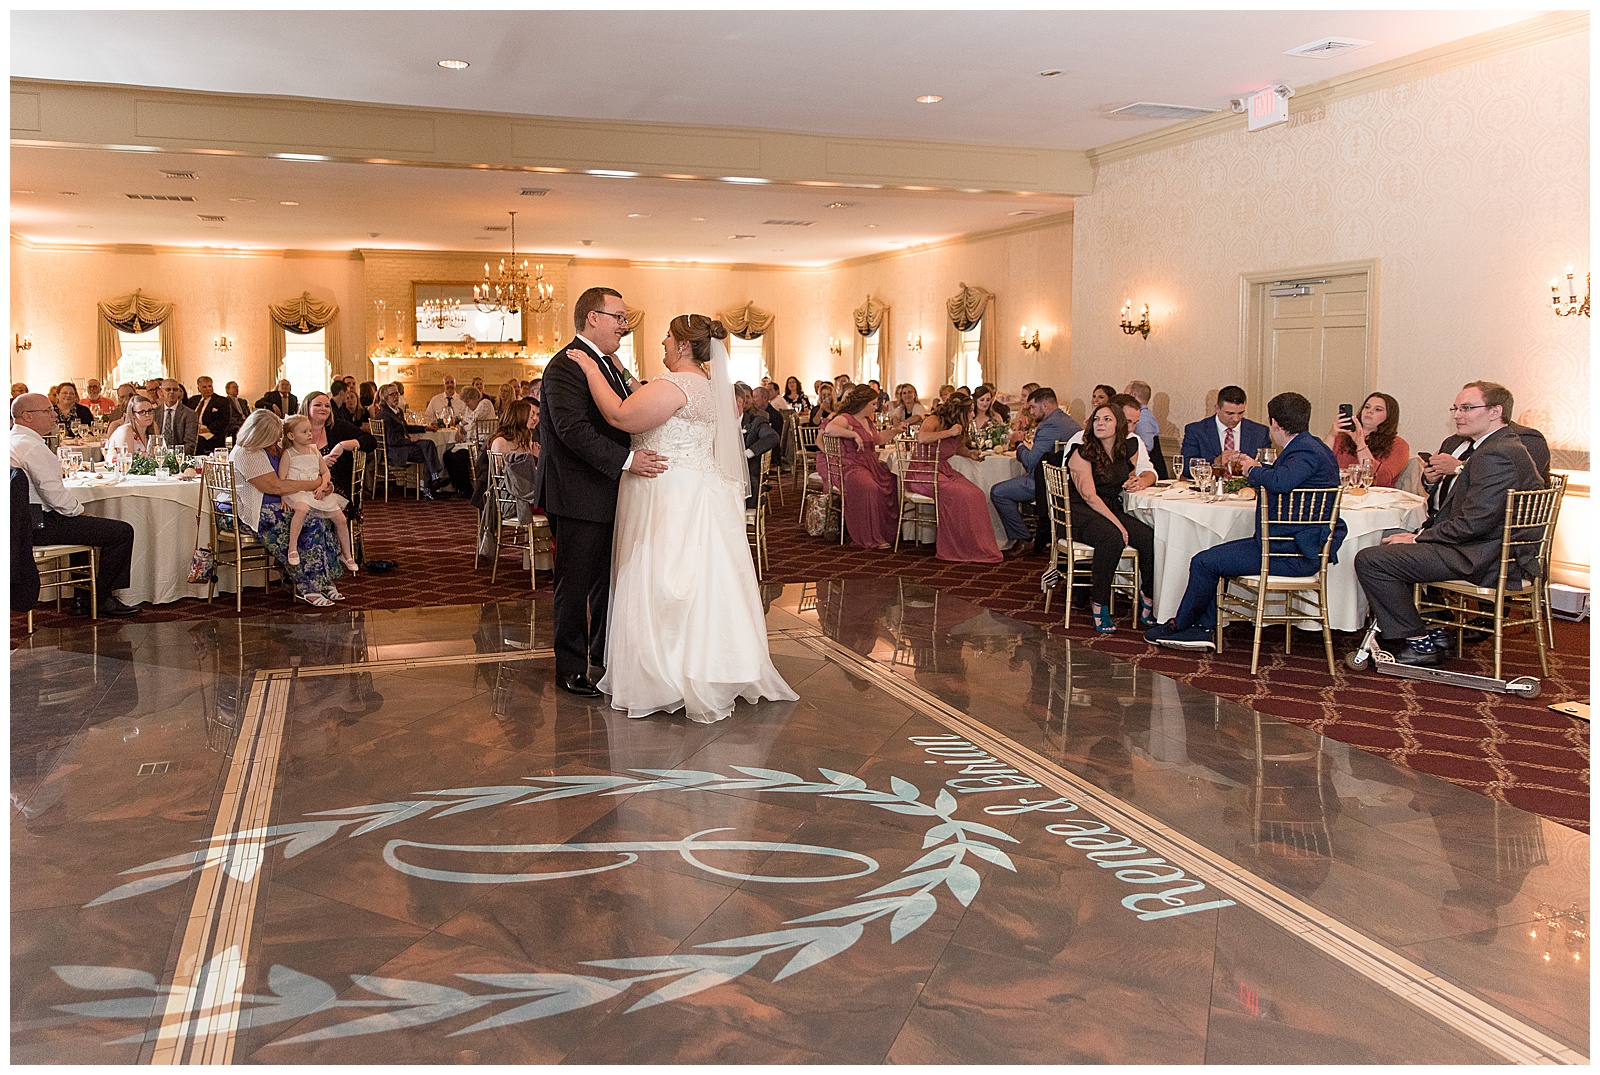 bride and groom taking their first dance as a married couple during their reception in the ballroom of willows at historic strasburg